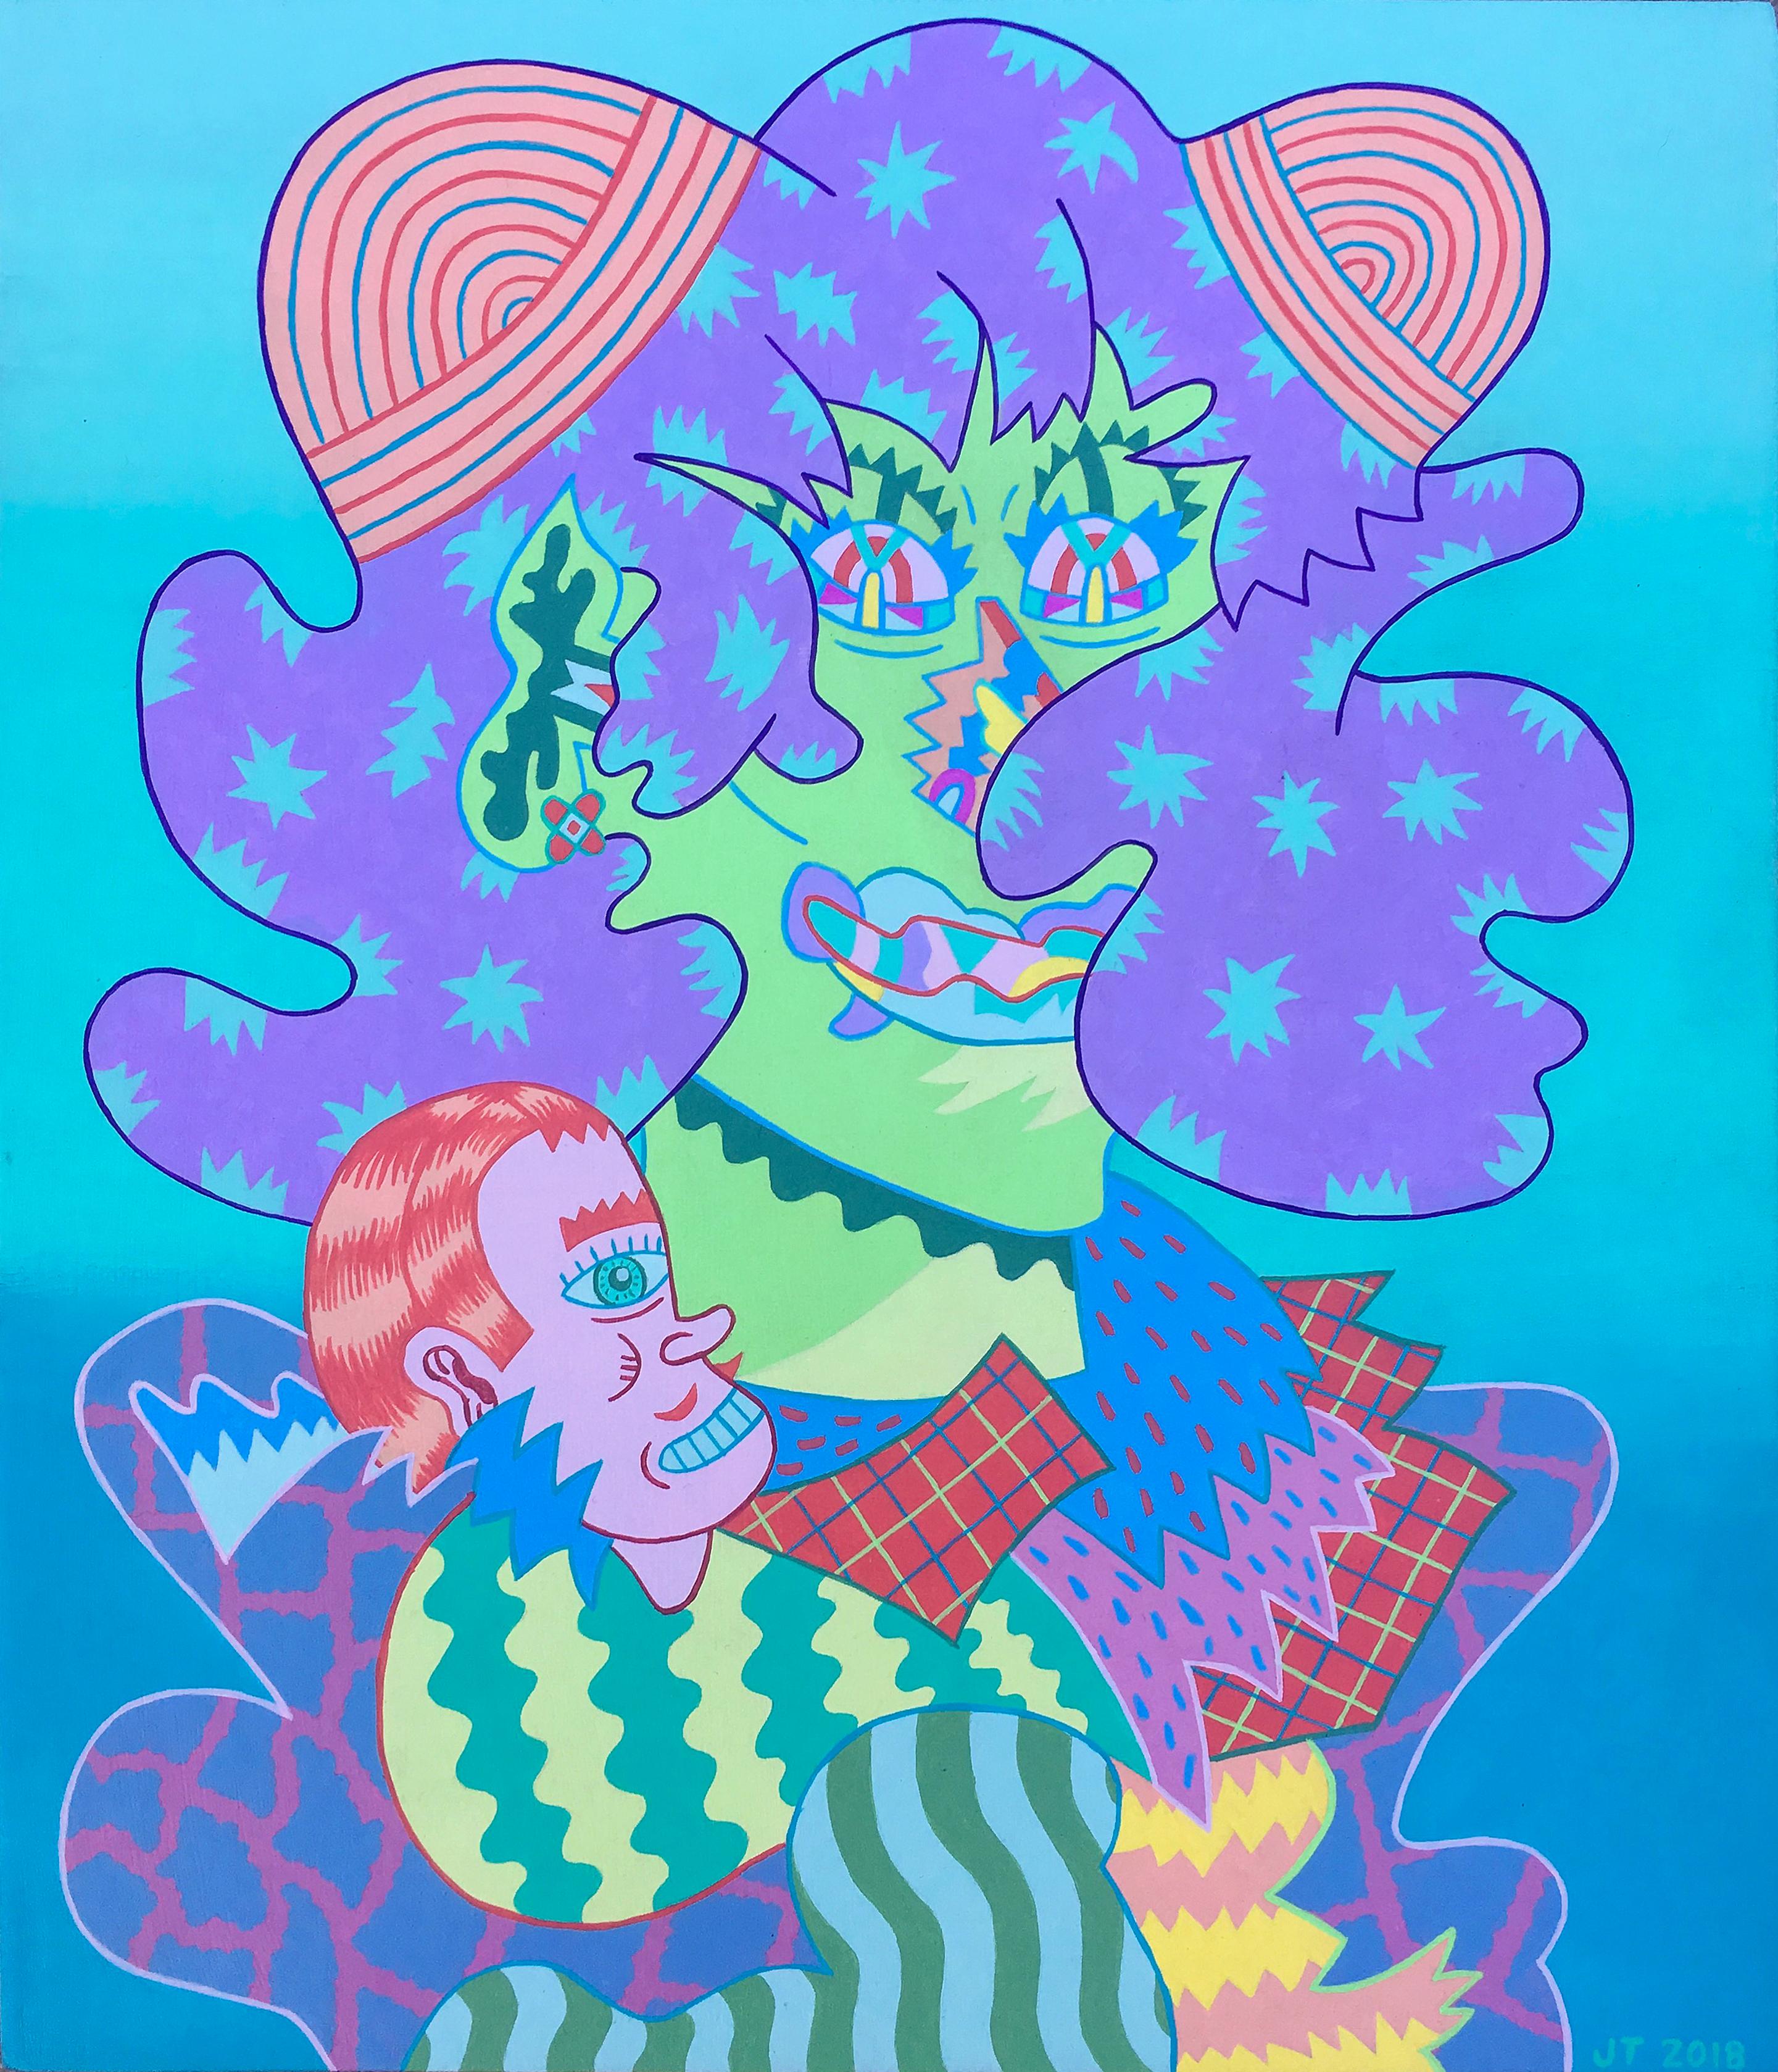 Joe Tallarico, Grape Wrap, 2018, acrylic on wood

Multicolored and brightly colored whimsical, cartoonish portrait painting in the style of the Chicago Imagists. Energetic composition in blue, purple, pink and mint green. 

Joe Tallarico has been